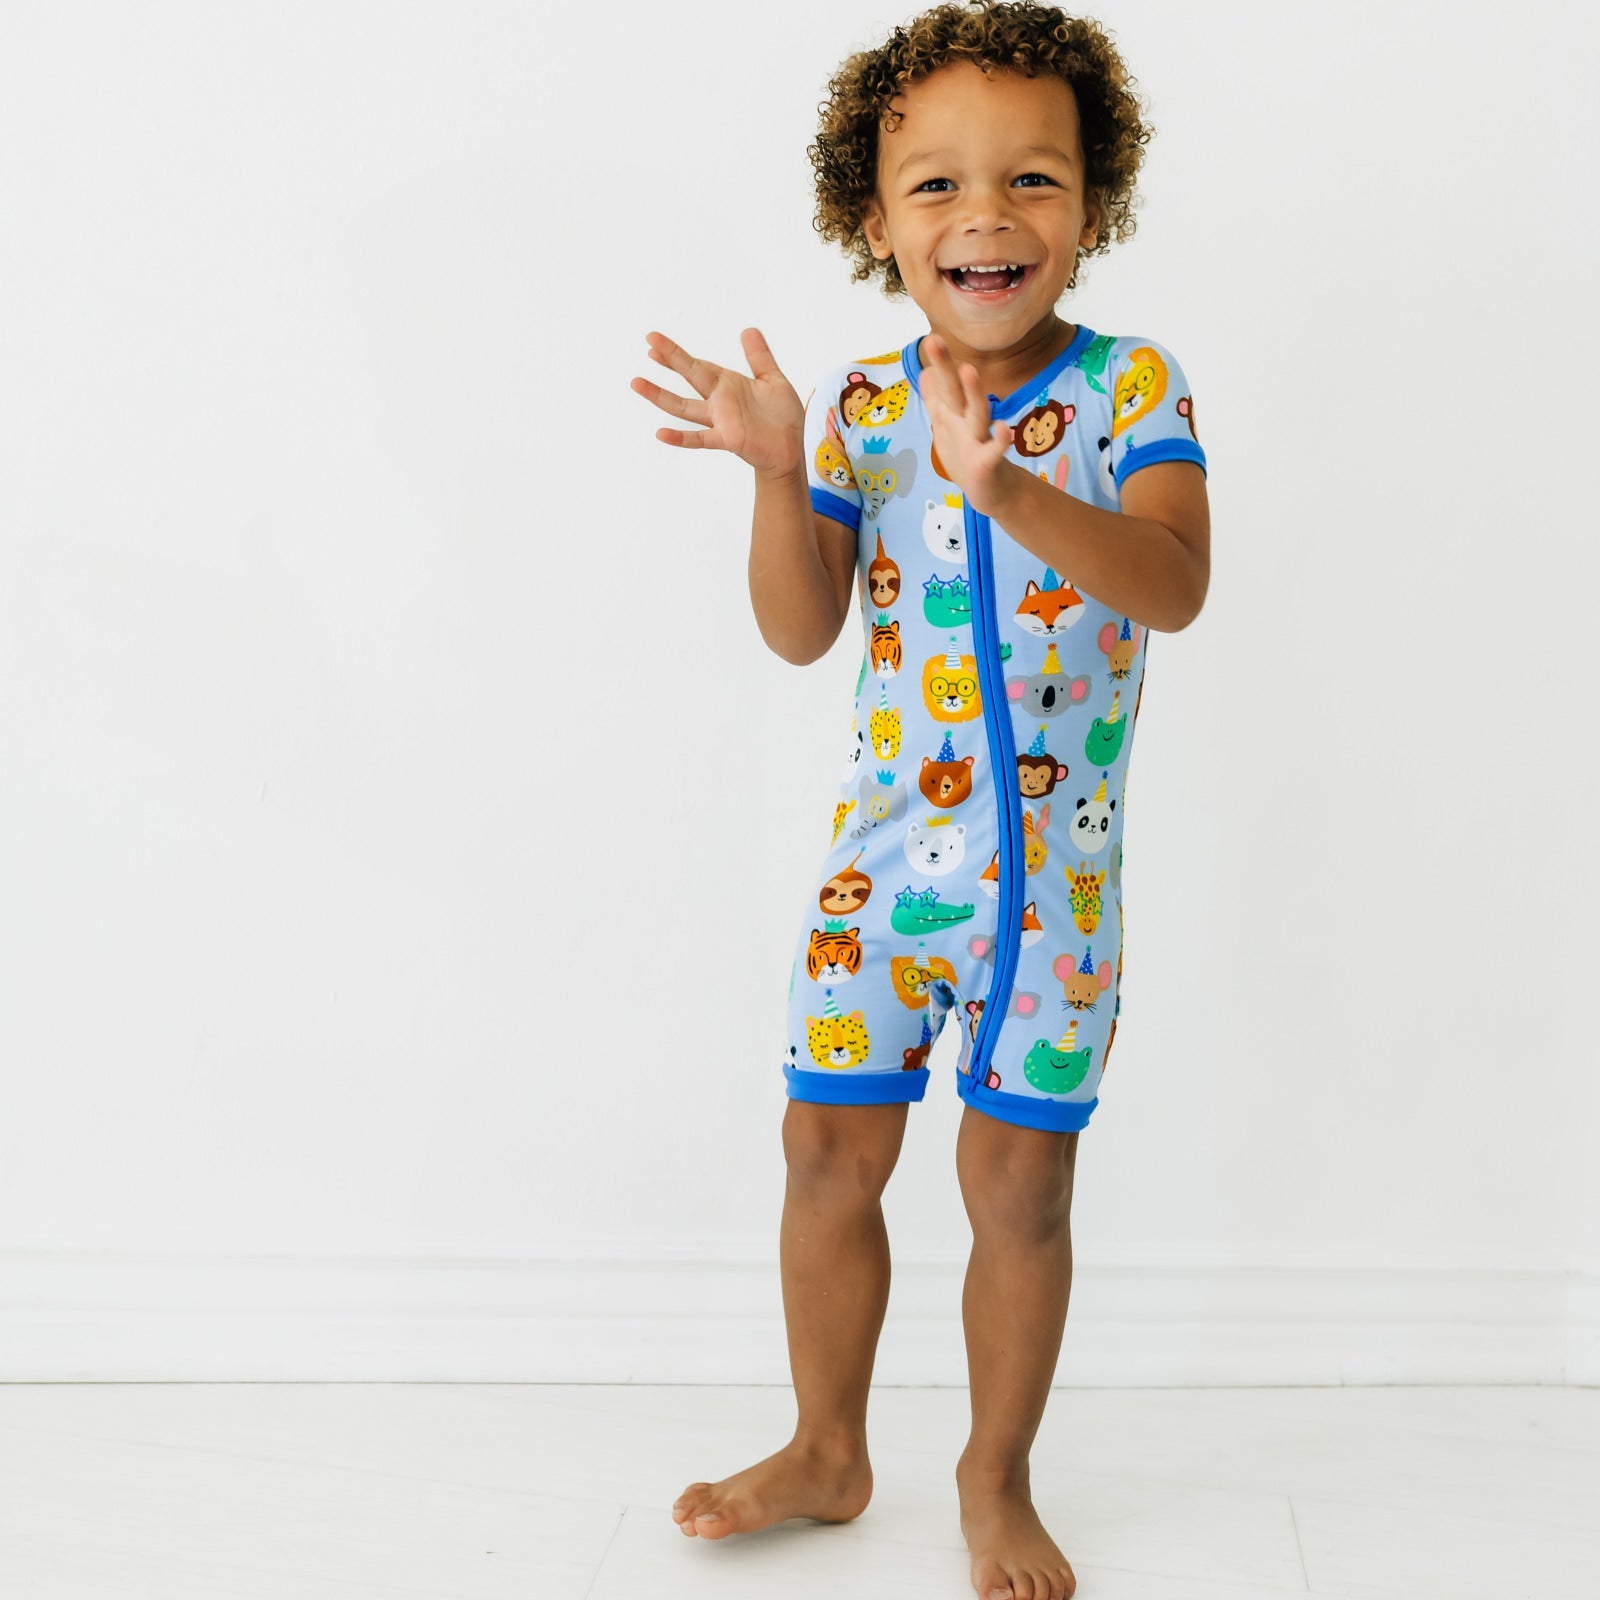 Child posing wearing a Blue Party Pals shorty zippy